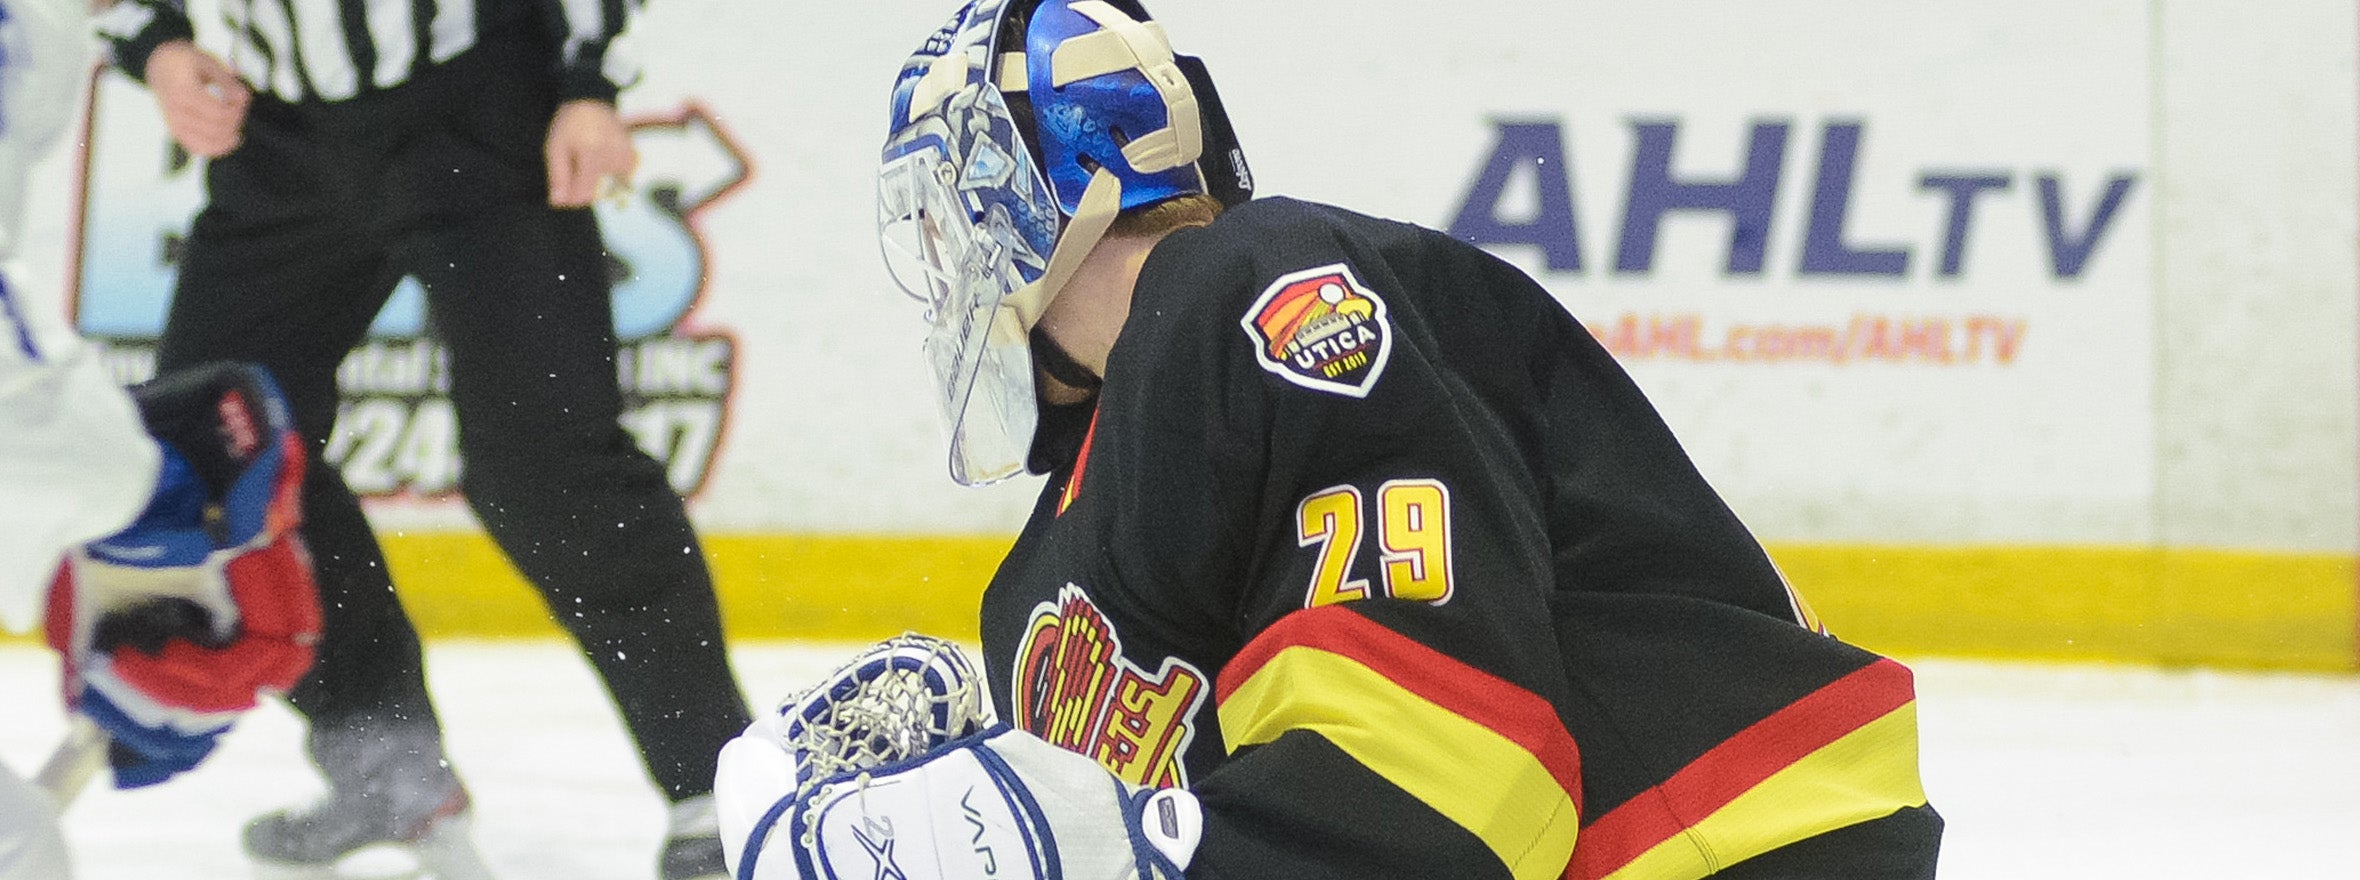 CANUCKS SIGN GOALTENDER JAKE KIELLY TO A ONE-YEAR, TWO WAY CONTRACT  